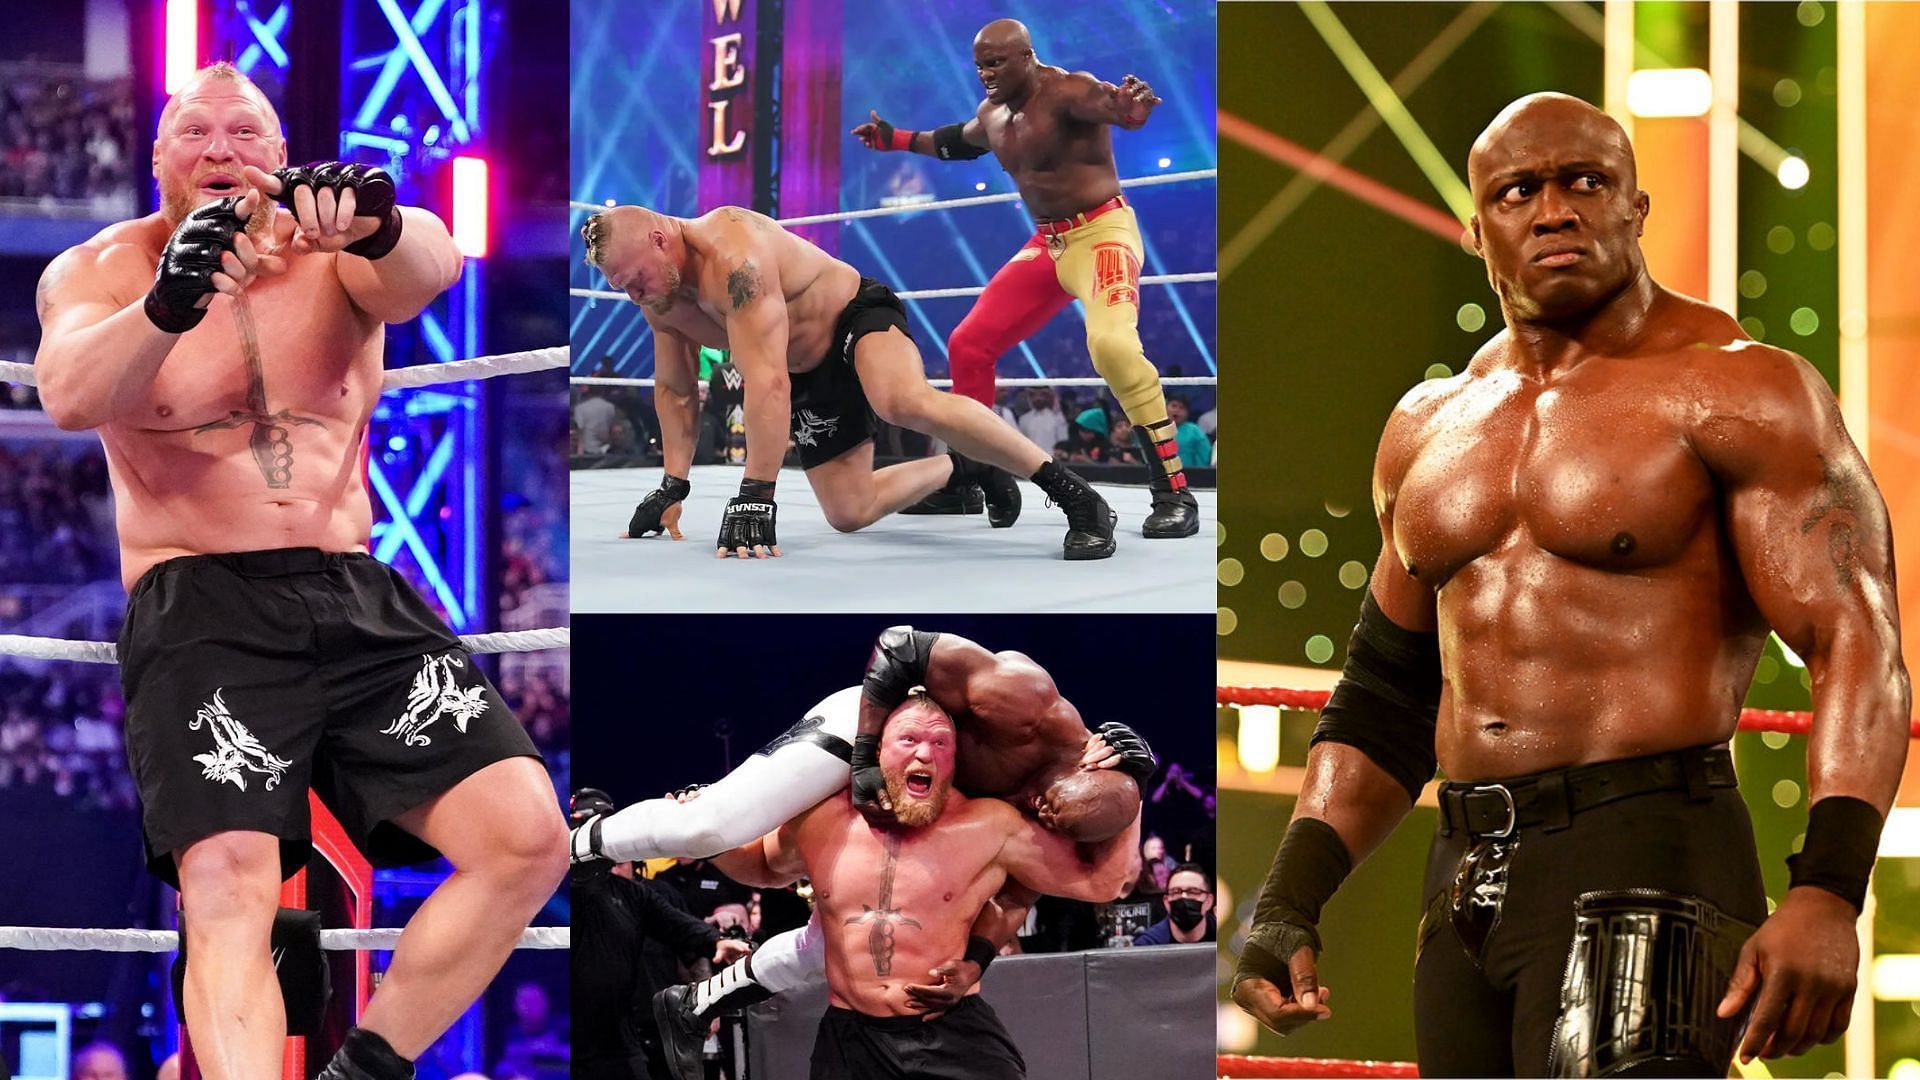 Bobby Lashley and Brock Lesnar&#039;s epic in 2022 needs a finale